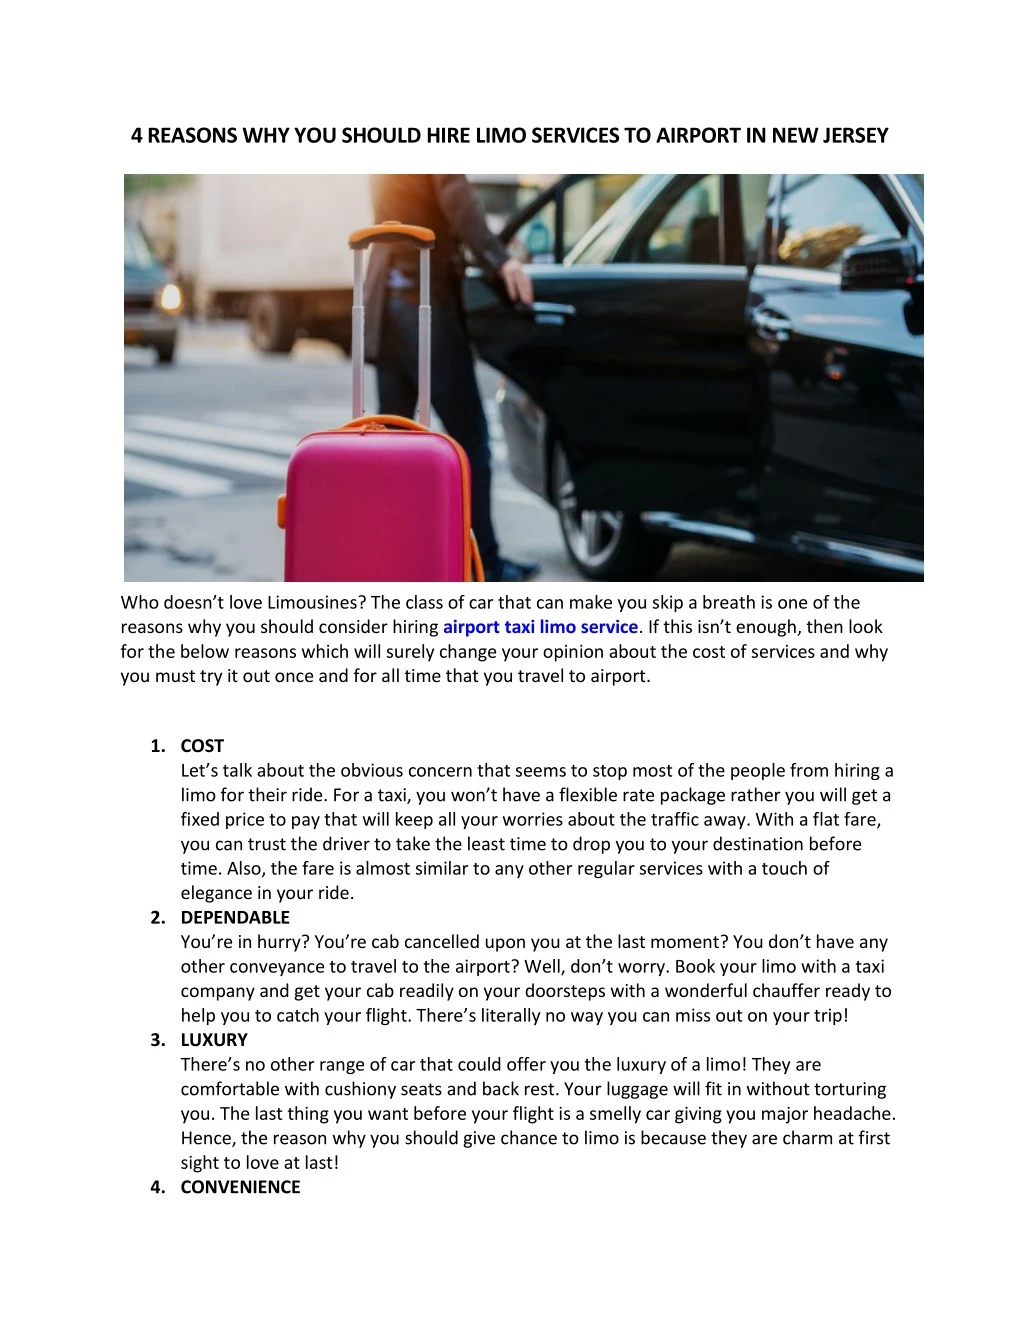 4 reasons why you should hire limo services